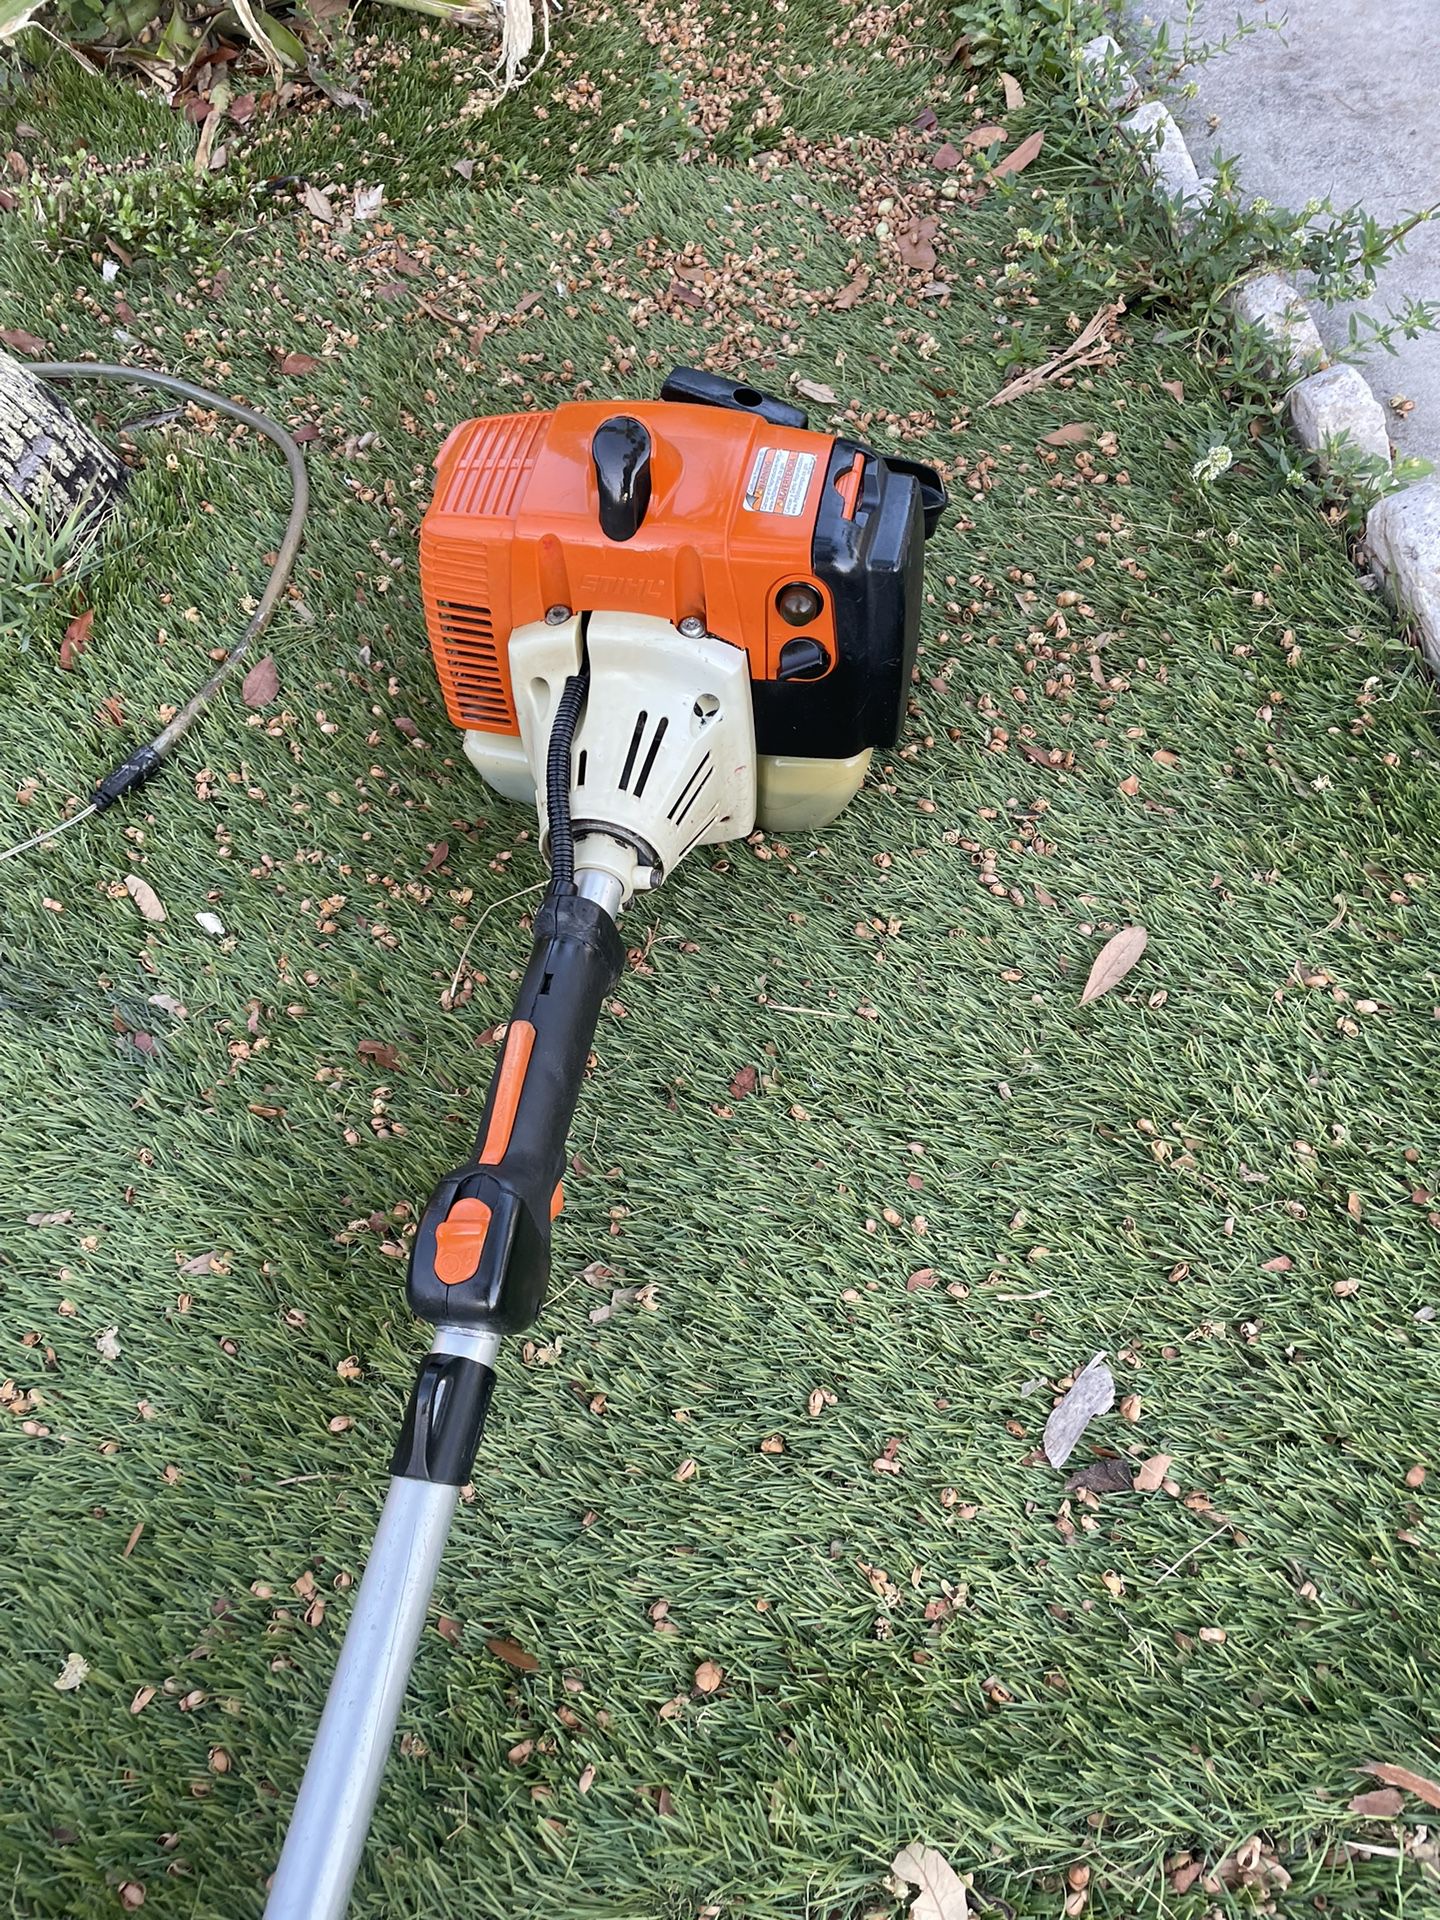 Stihl Fs250 Weed Eater